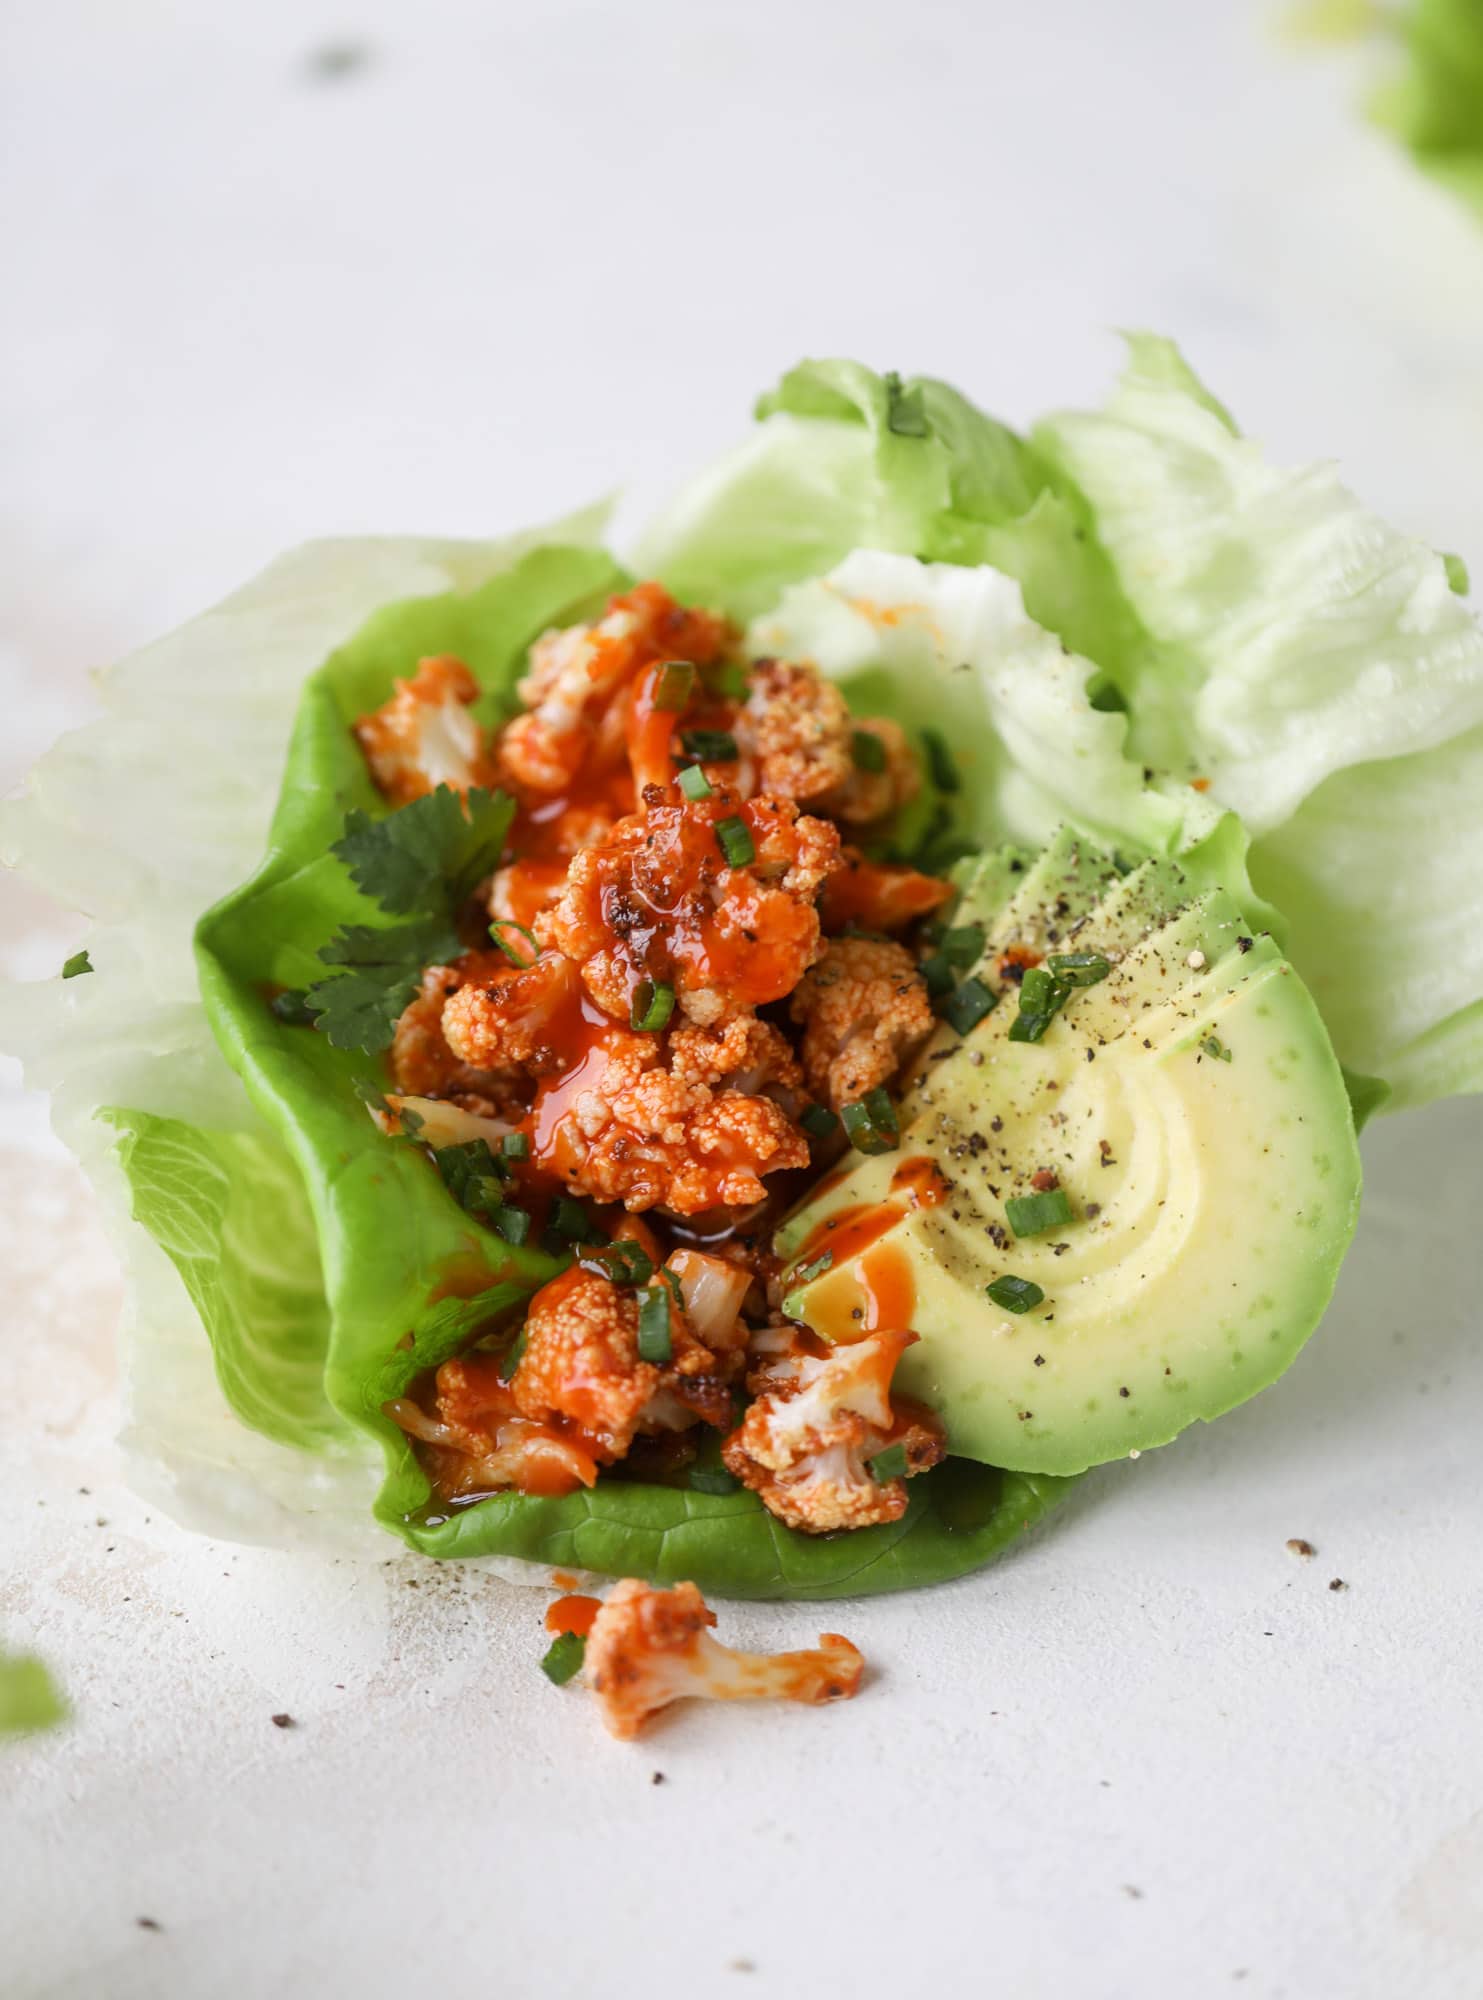 These buffalo cauliflower lettuce wraps are perfect for game day or even a quick weeknight dinner. Roasted cauliflower with buffalo wing sauce, sliced avocado, crumbled blue cheese, scallions, cilantro and chives makes for a flavor explosion! I howsweeteats.com #buffalo #cauliflower